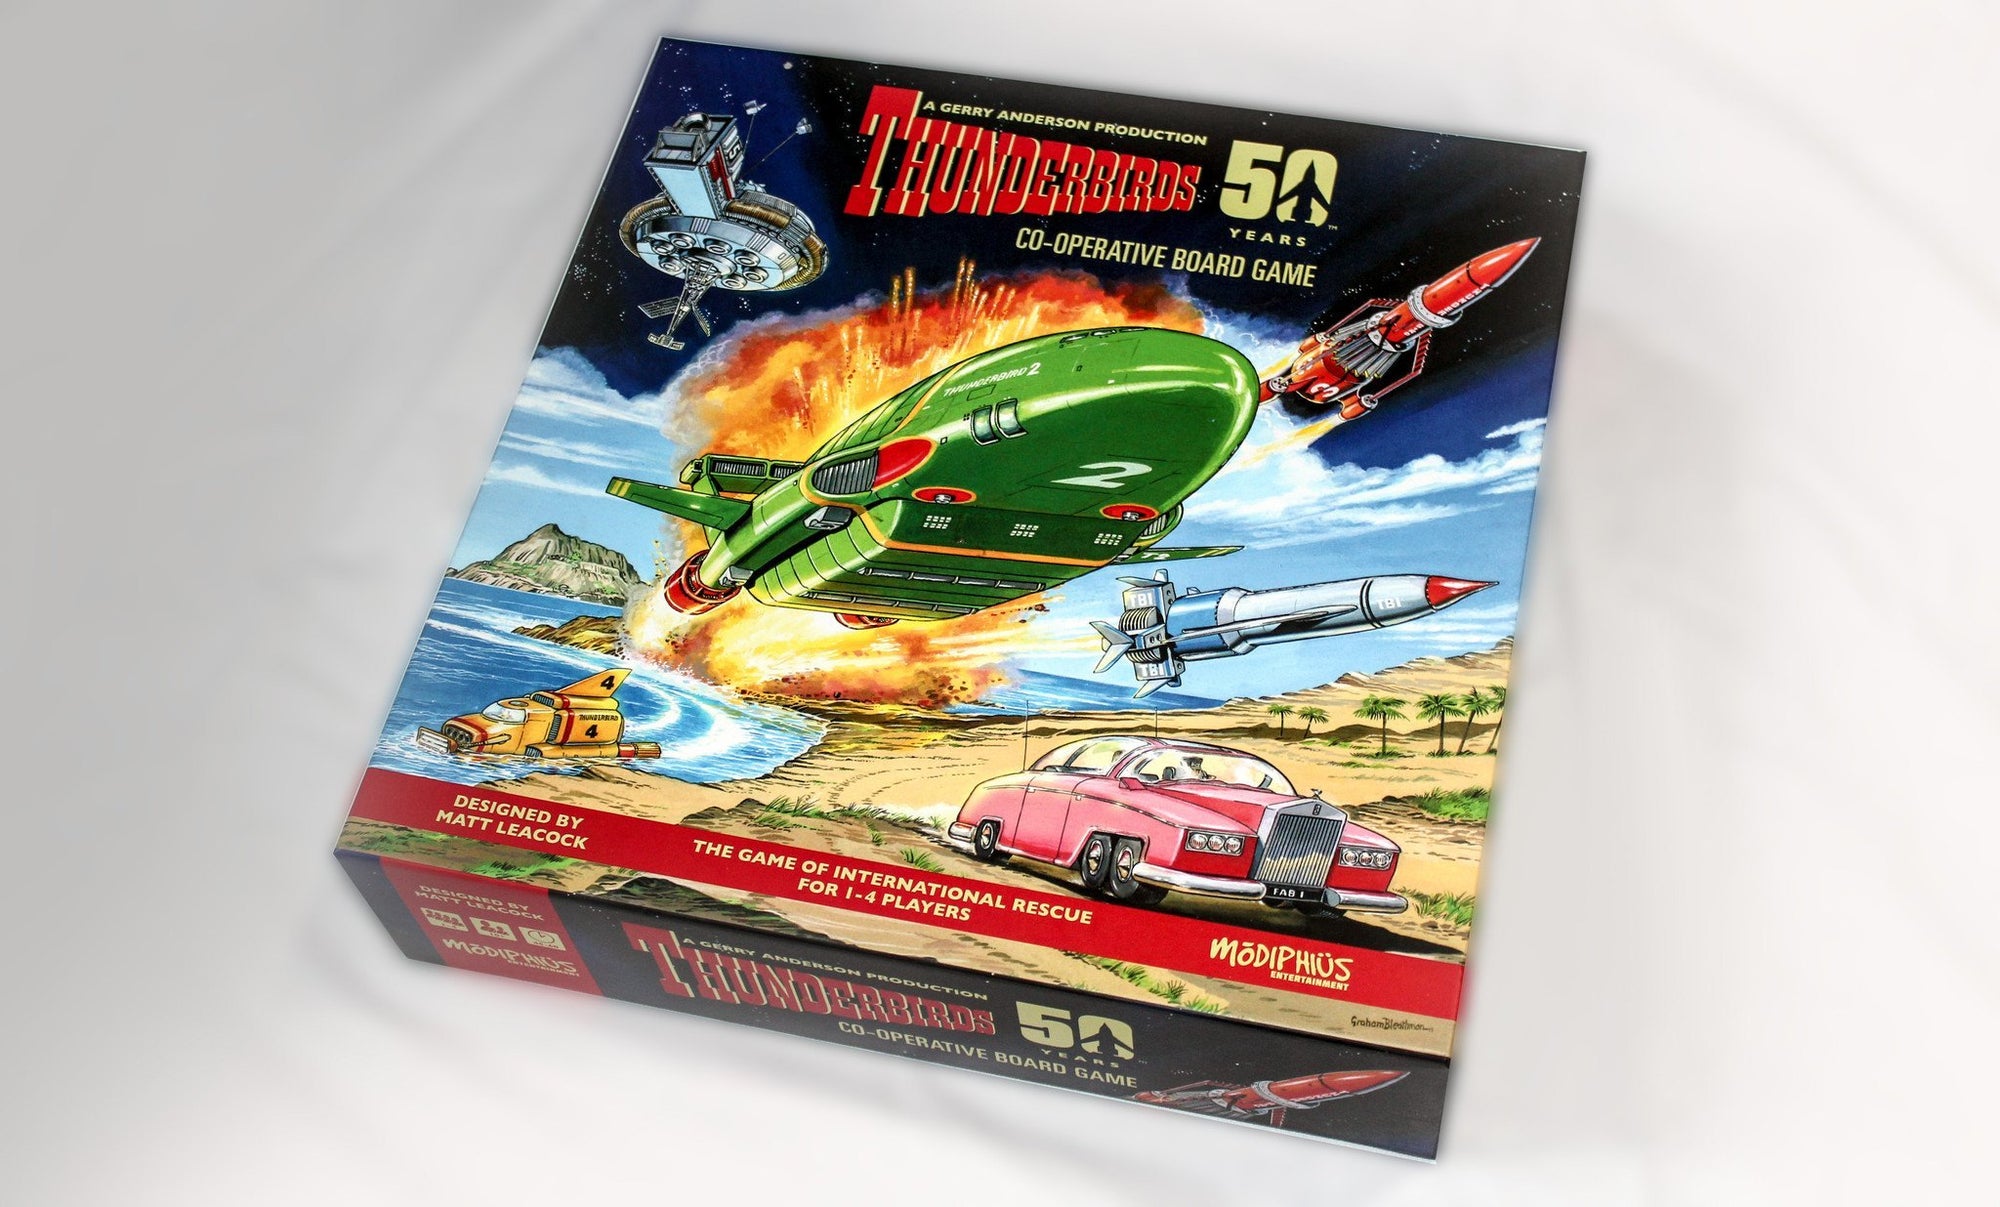 Thunderbirds Co-operative Boardgame - The Gerry Anderson Store